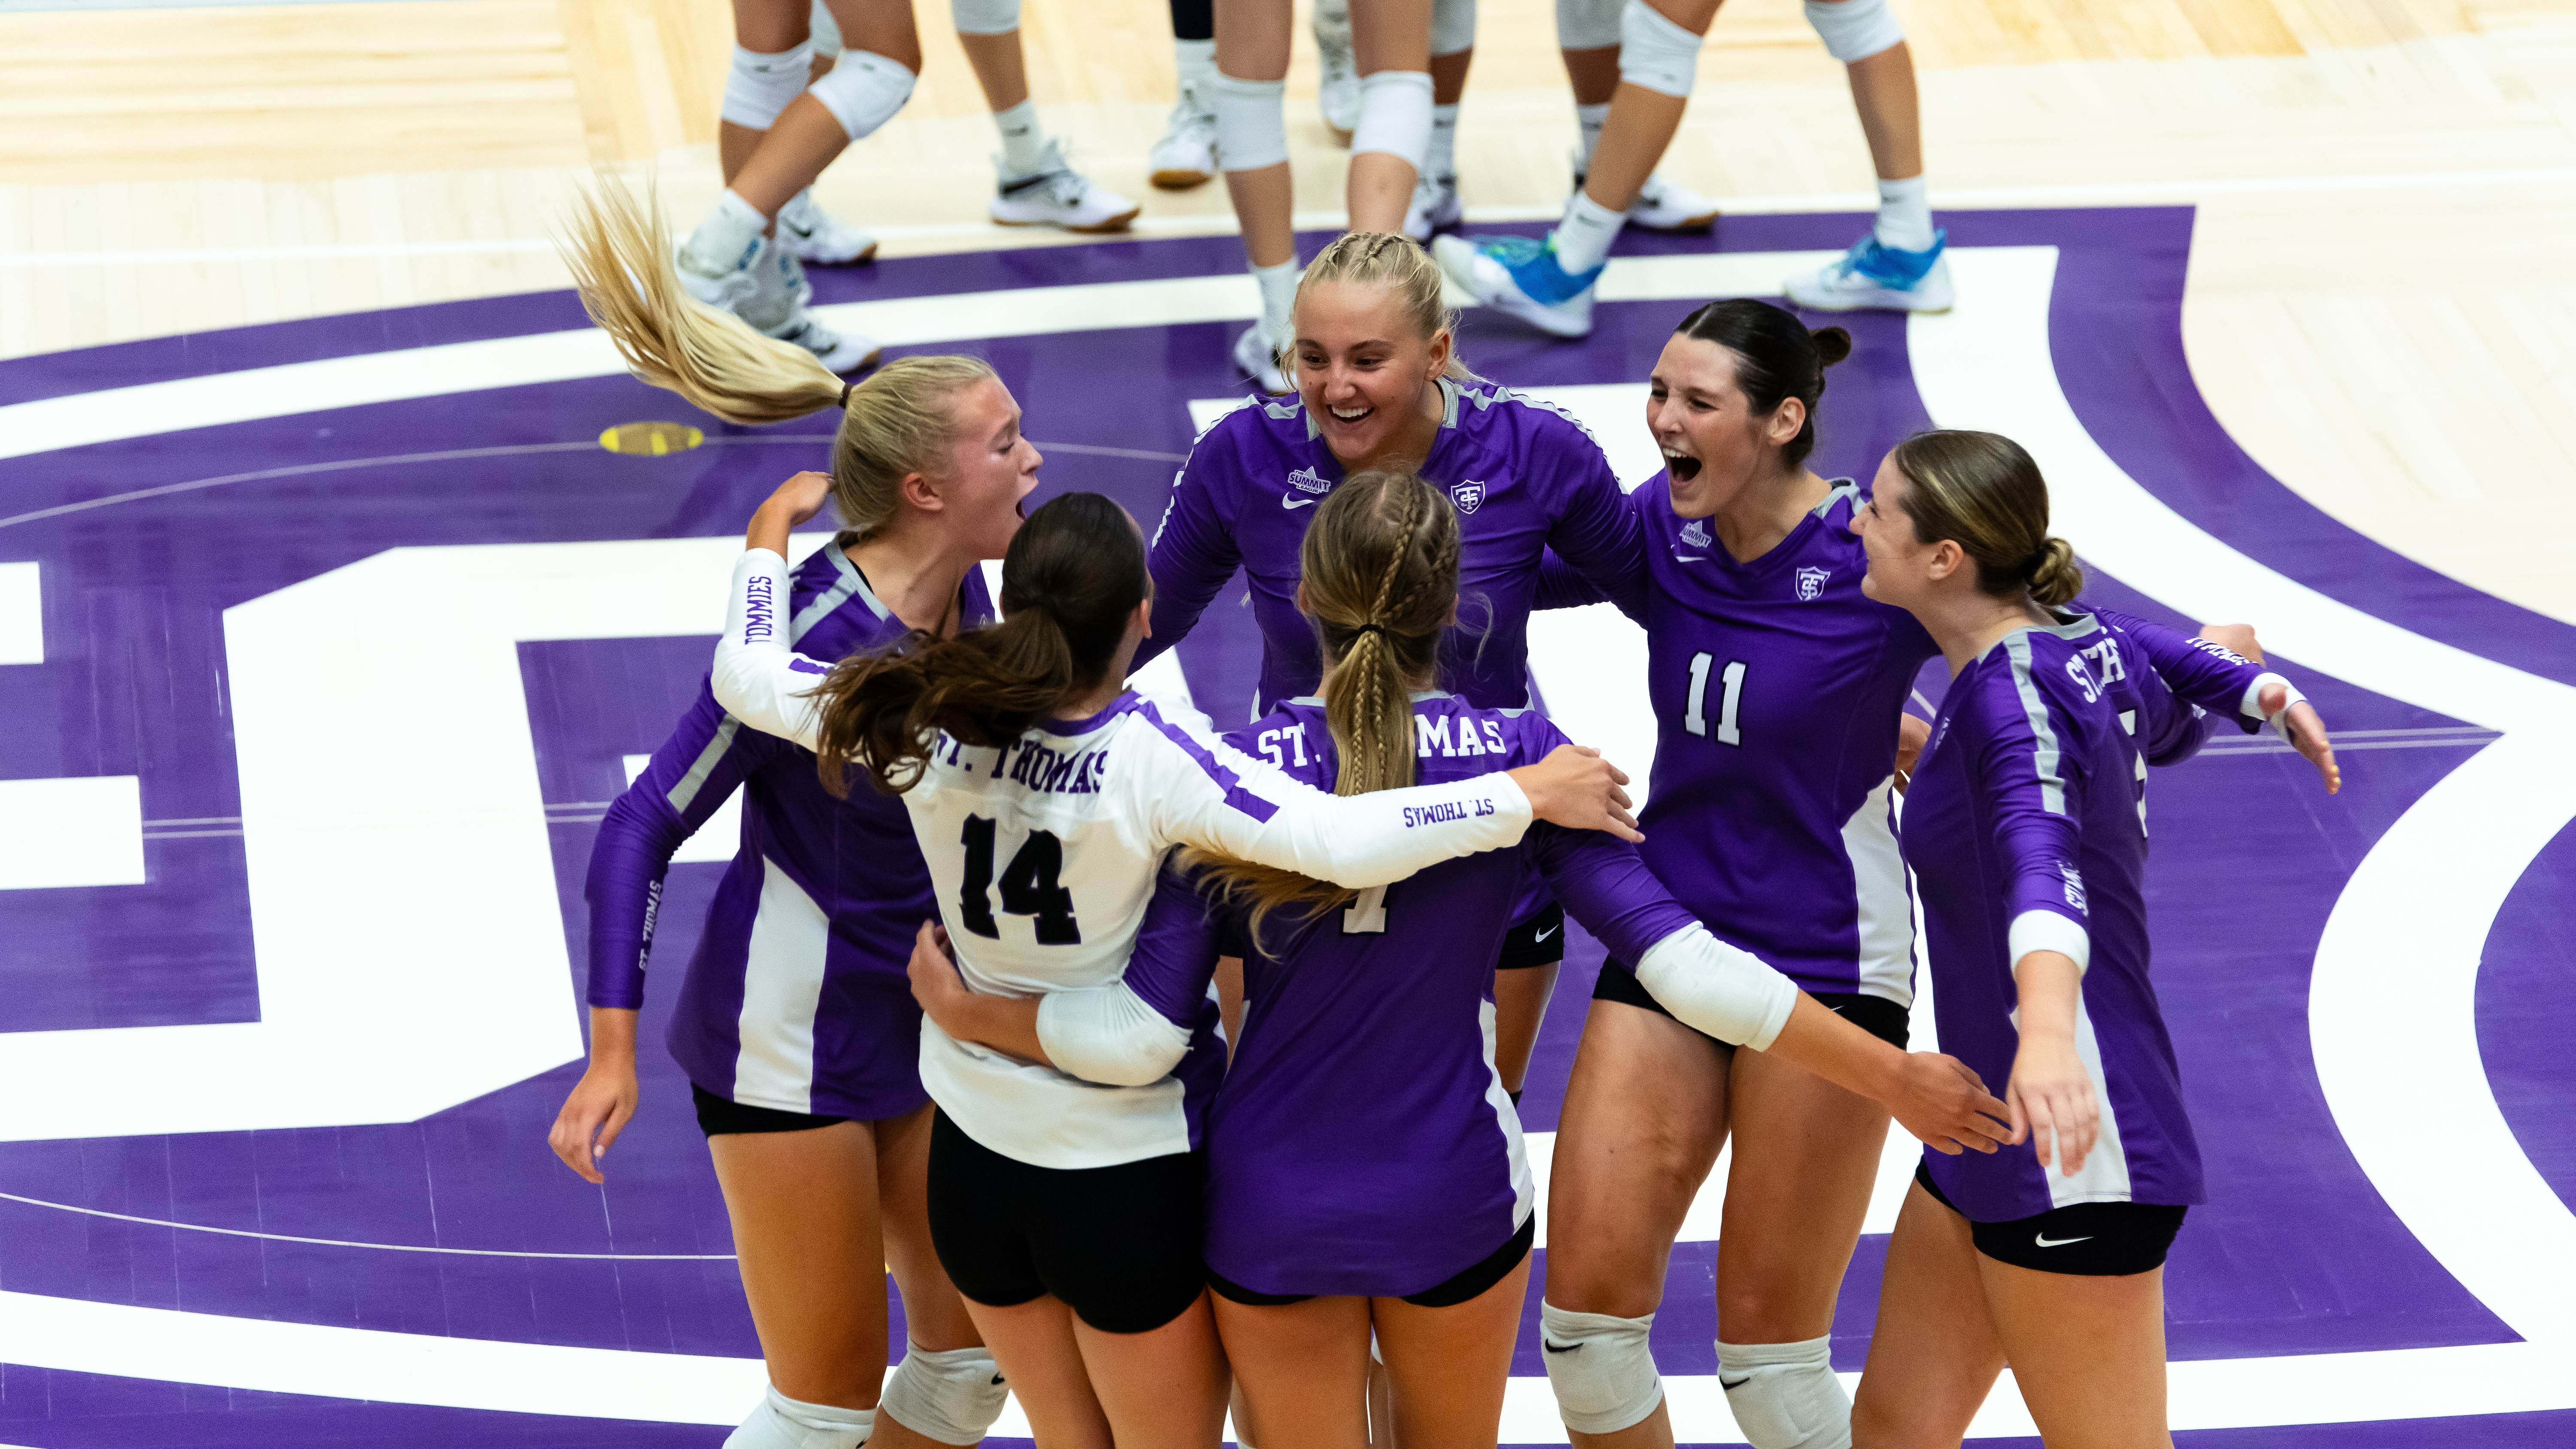 St. Thomas volleyball players celebrating a point during a St. Thomas home game